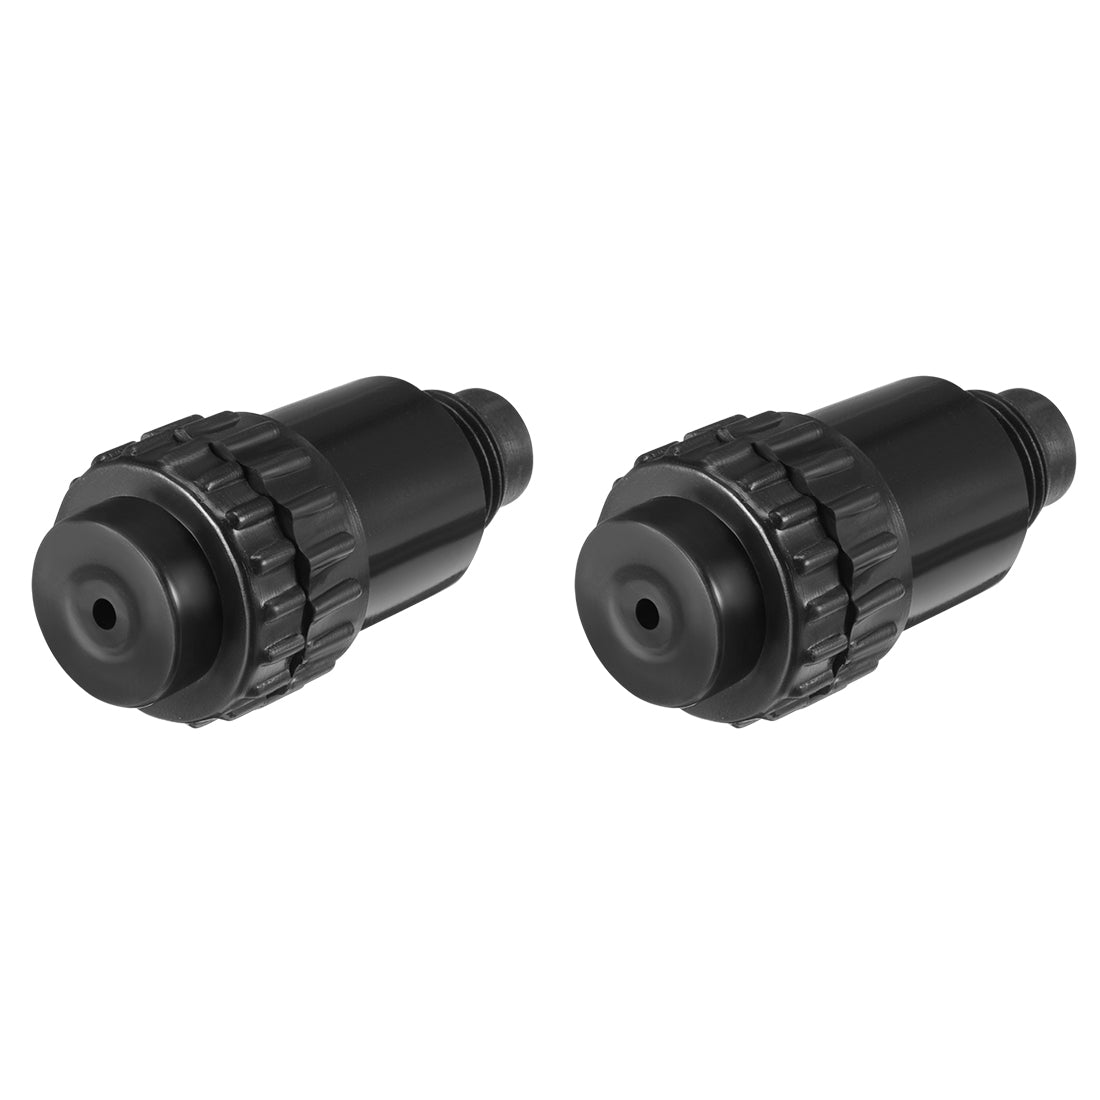 uxcell Uxcell 3/8BSPT Thread Oil Plug Connector Air Compressor Spare Fittings Black 2 pcs